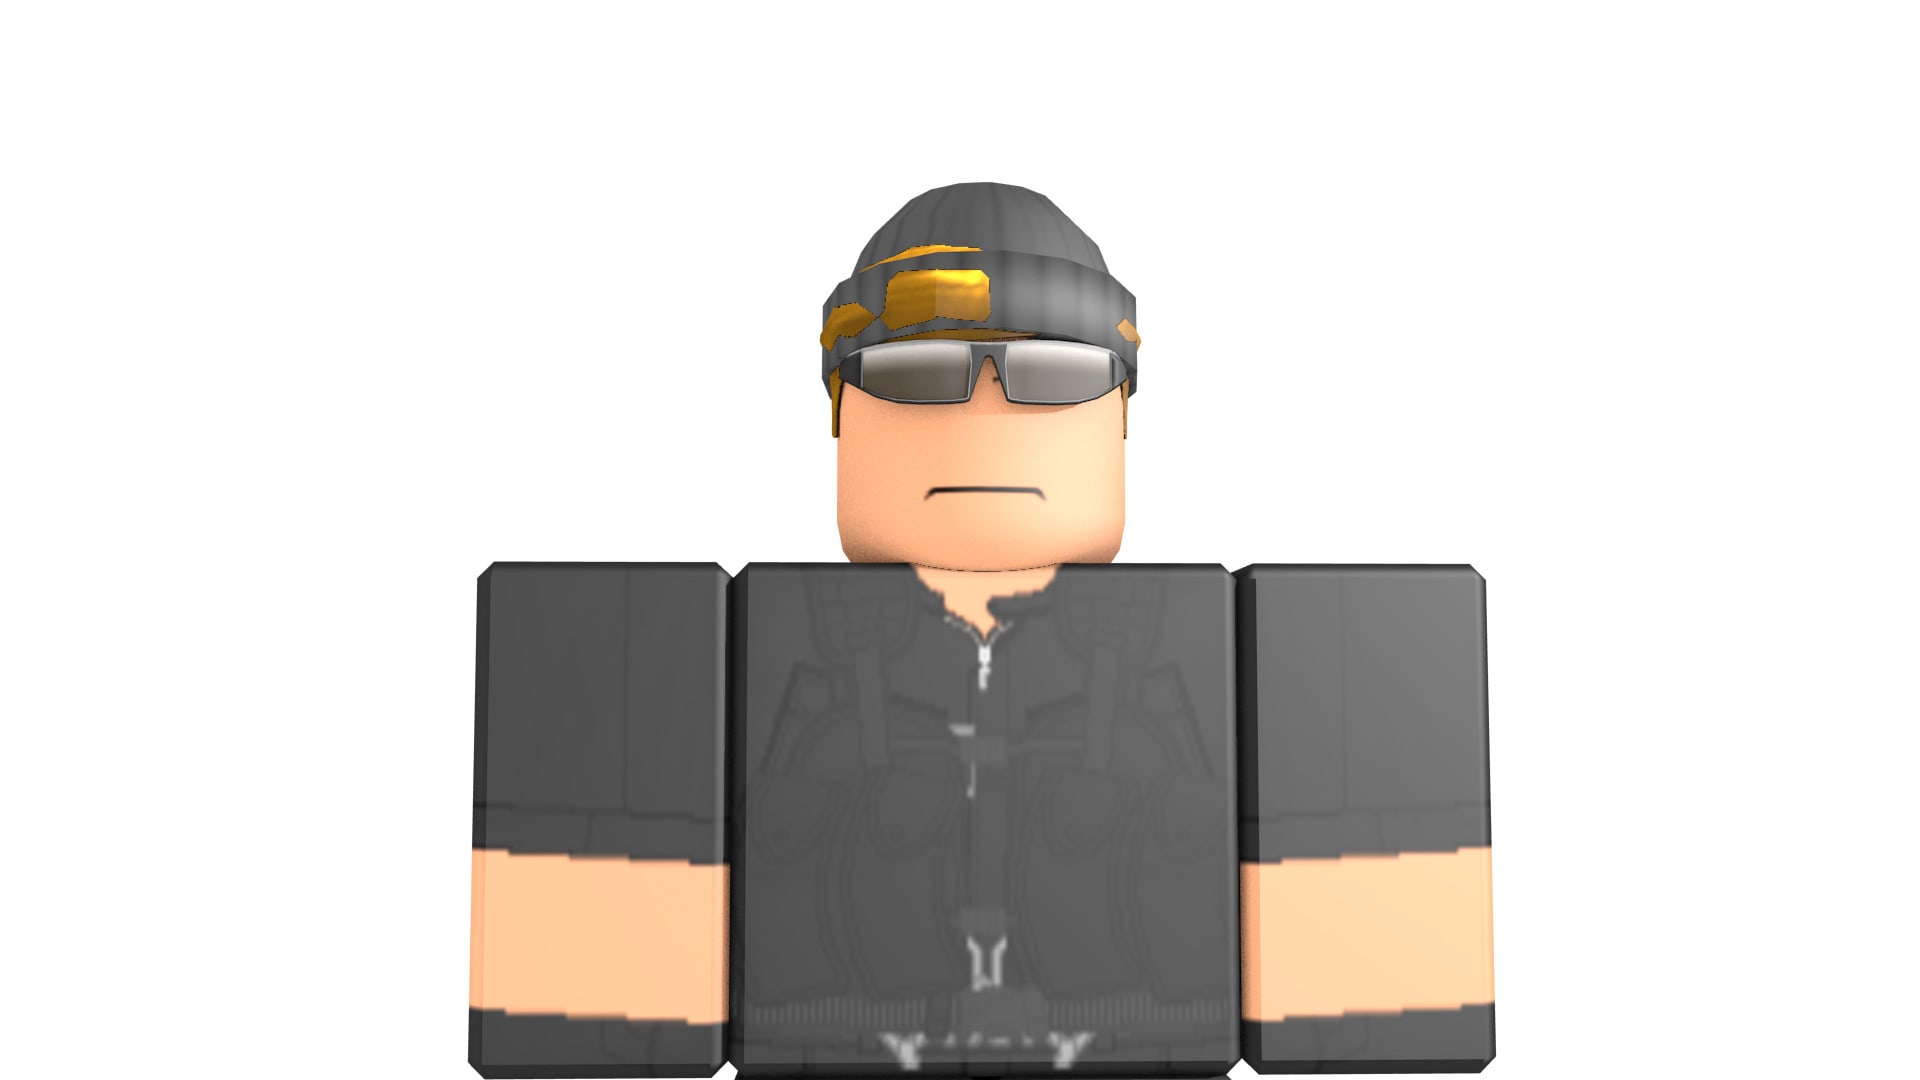 Render Your Roblox Character In 1920 X 1080 Hd By Vlanpai - hd roblox character